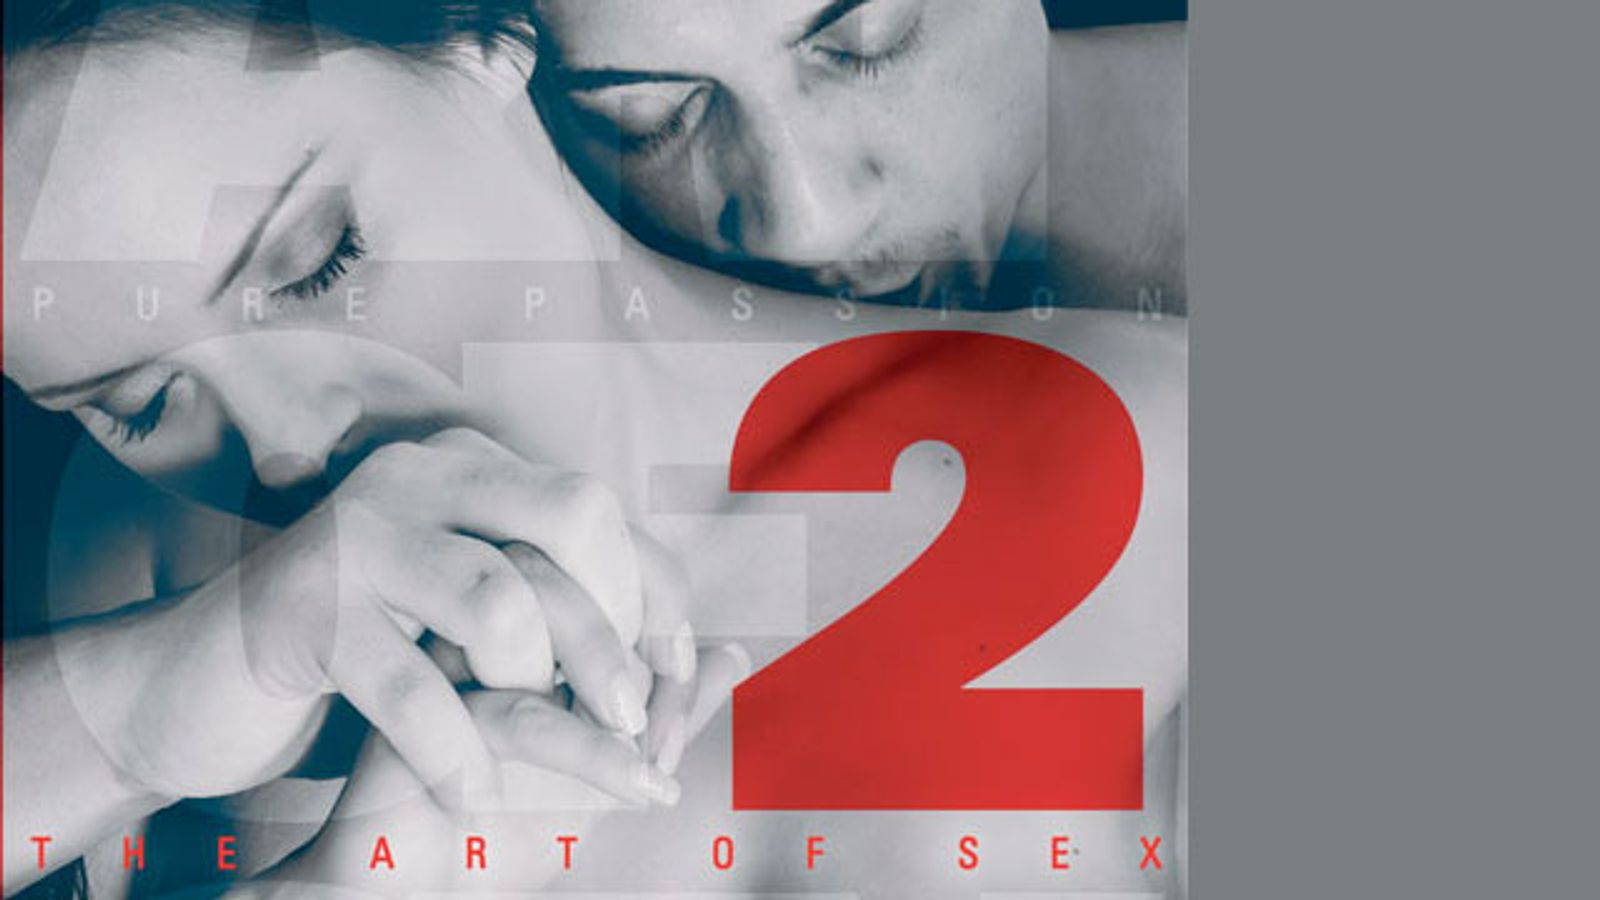 Viv Thomas’ ‘The Art of Sex 2’ Distributed by Girlfriends Films